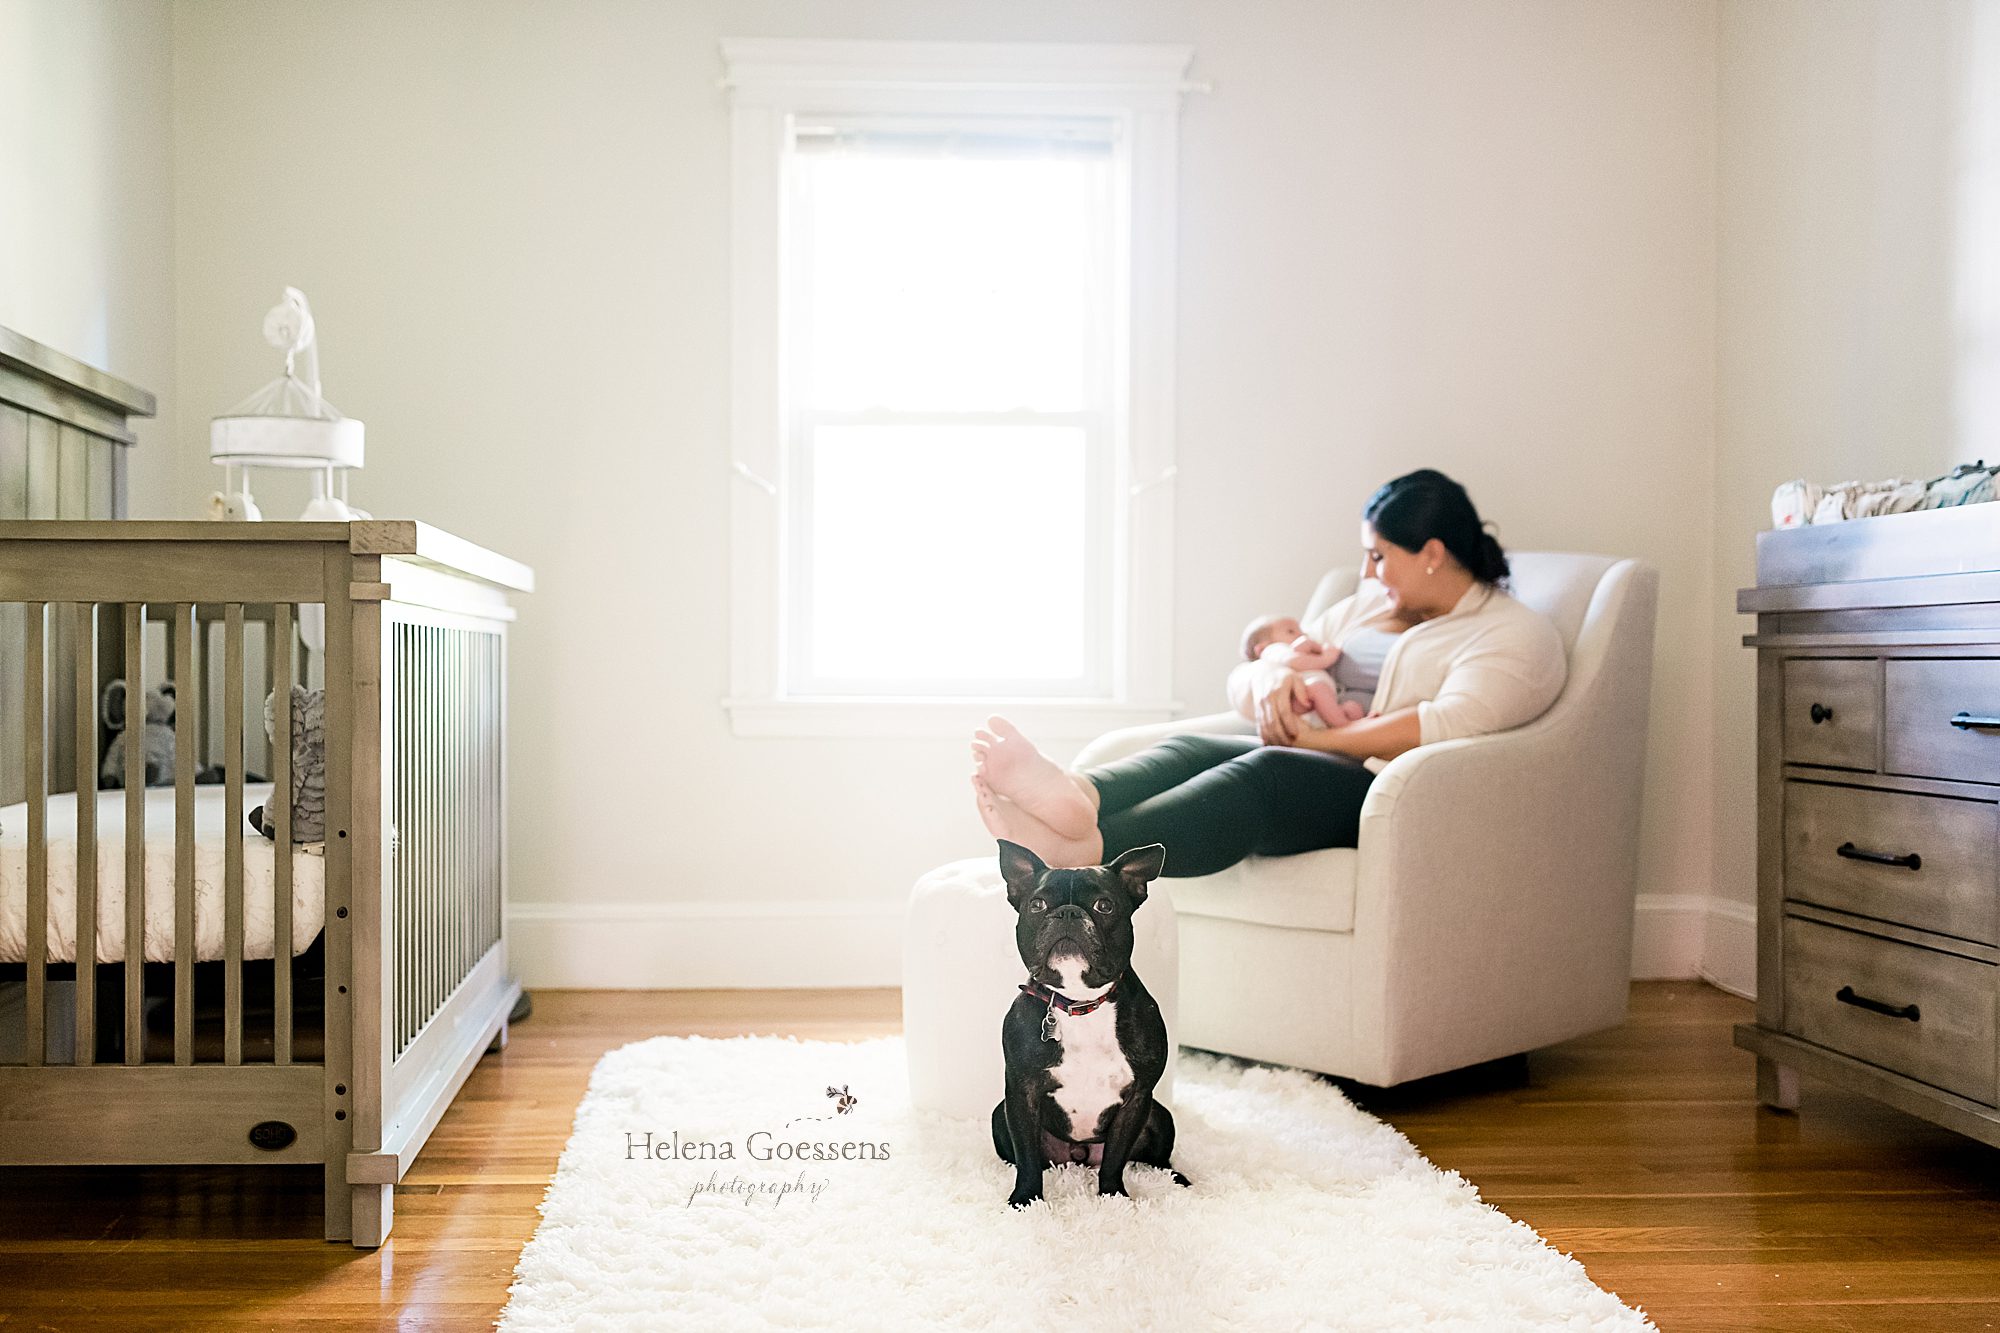 Helena Goessens captures mother with new baby and dog